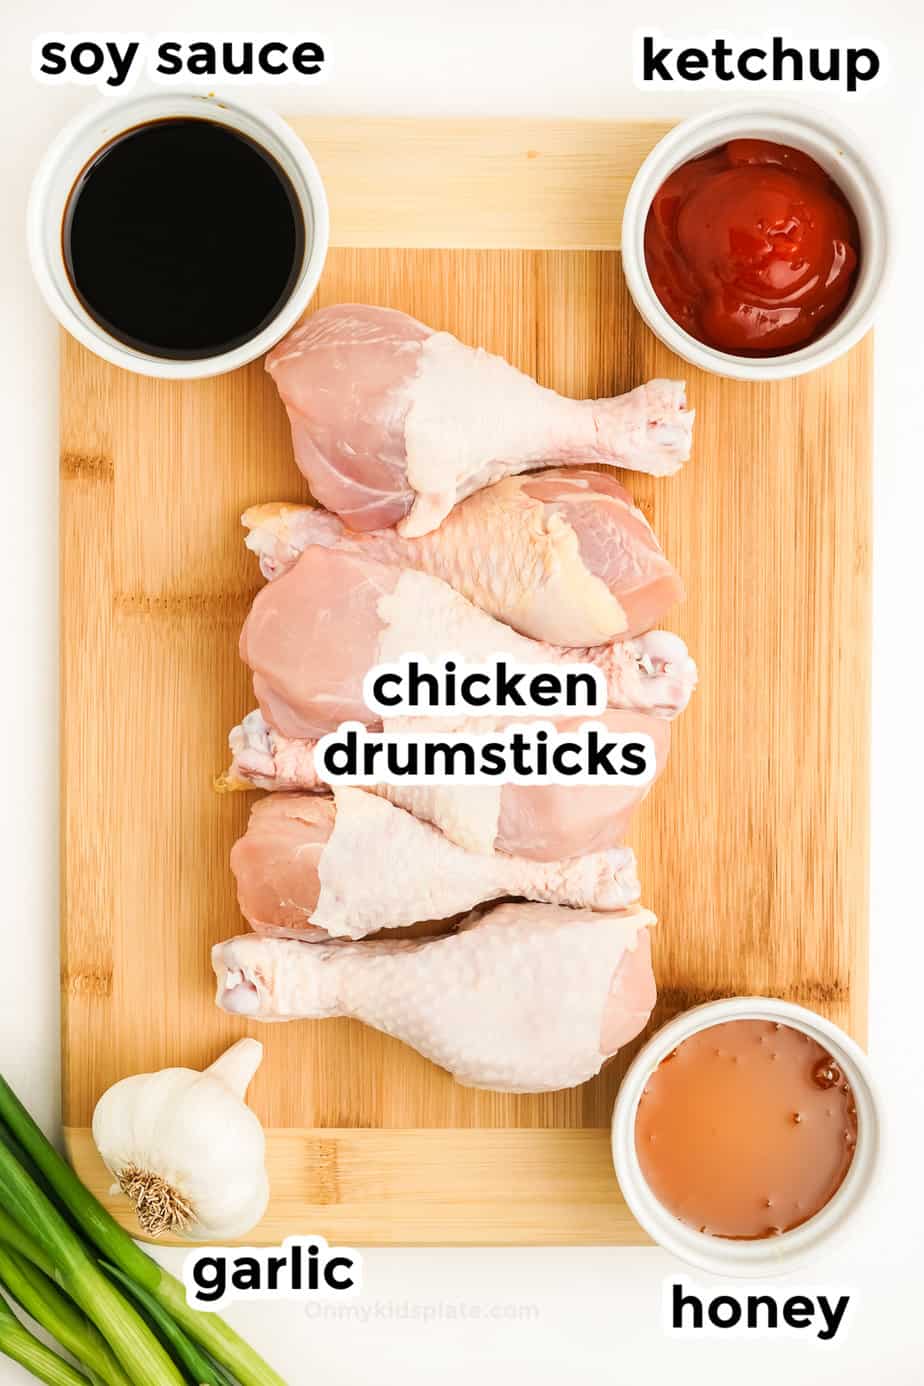 Ingredients for chicken drumsticks on a cutting board from overhead with labels.